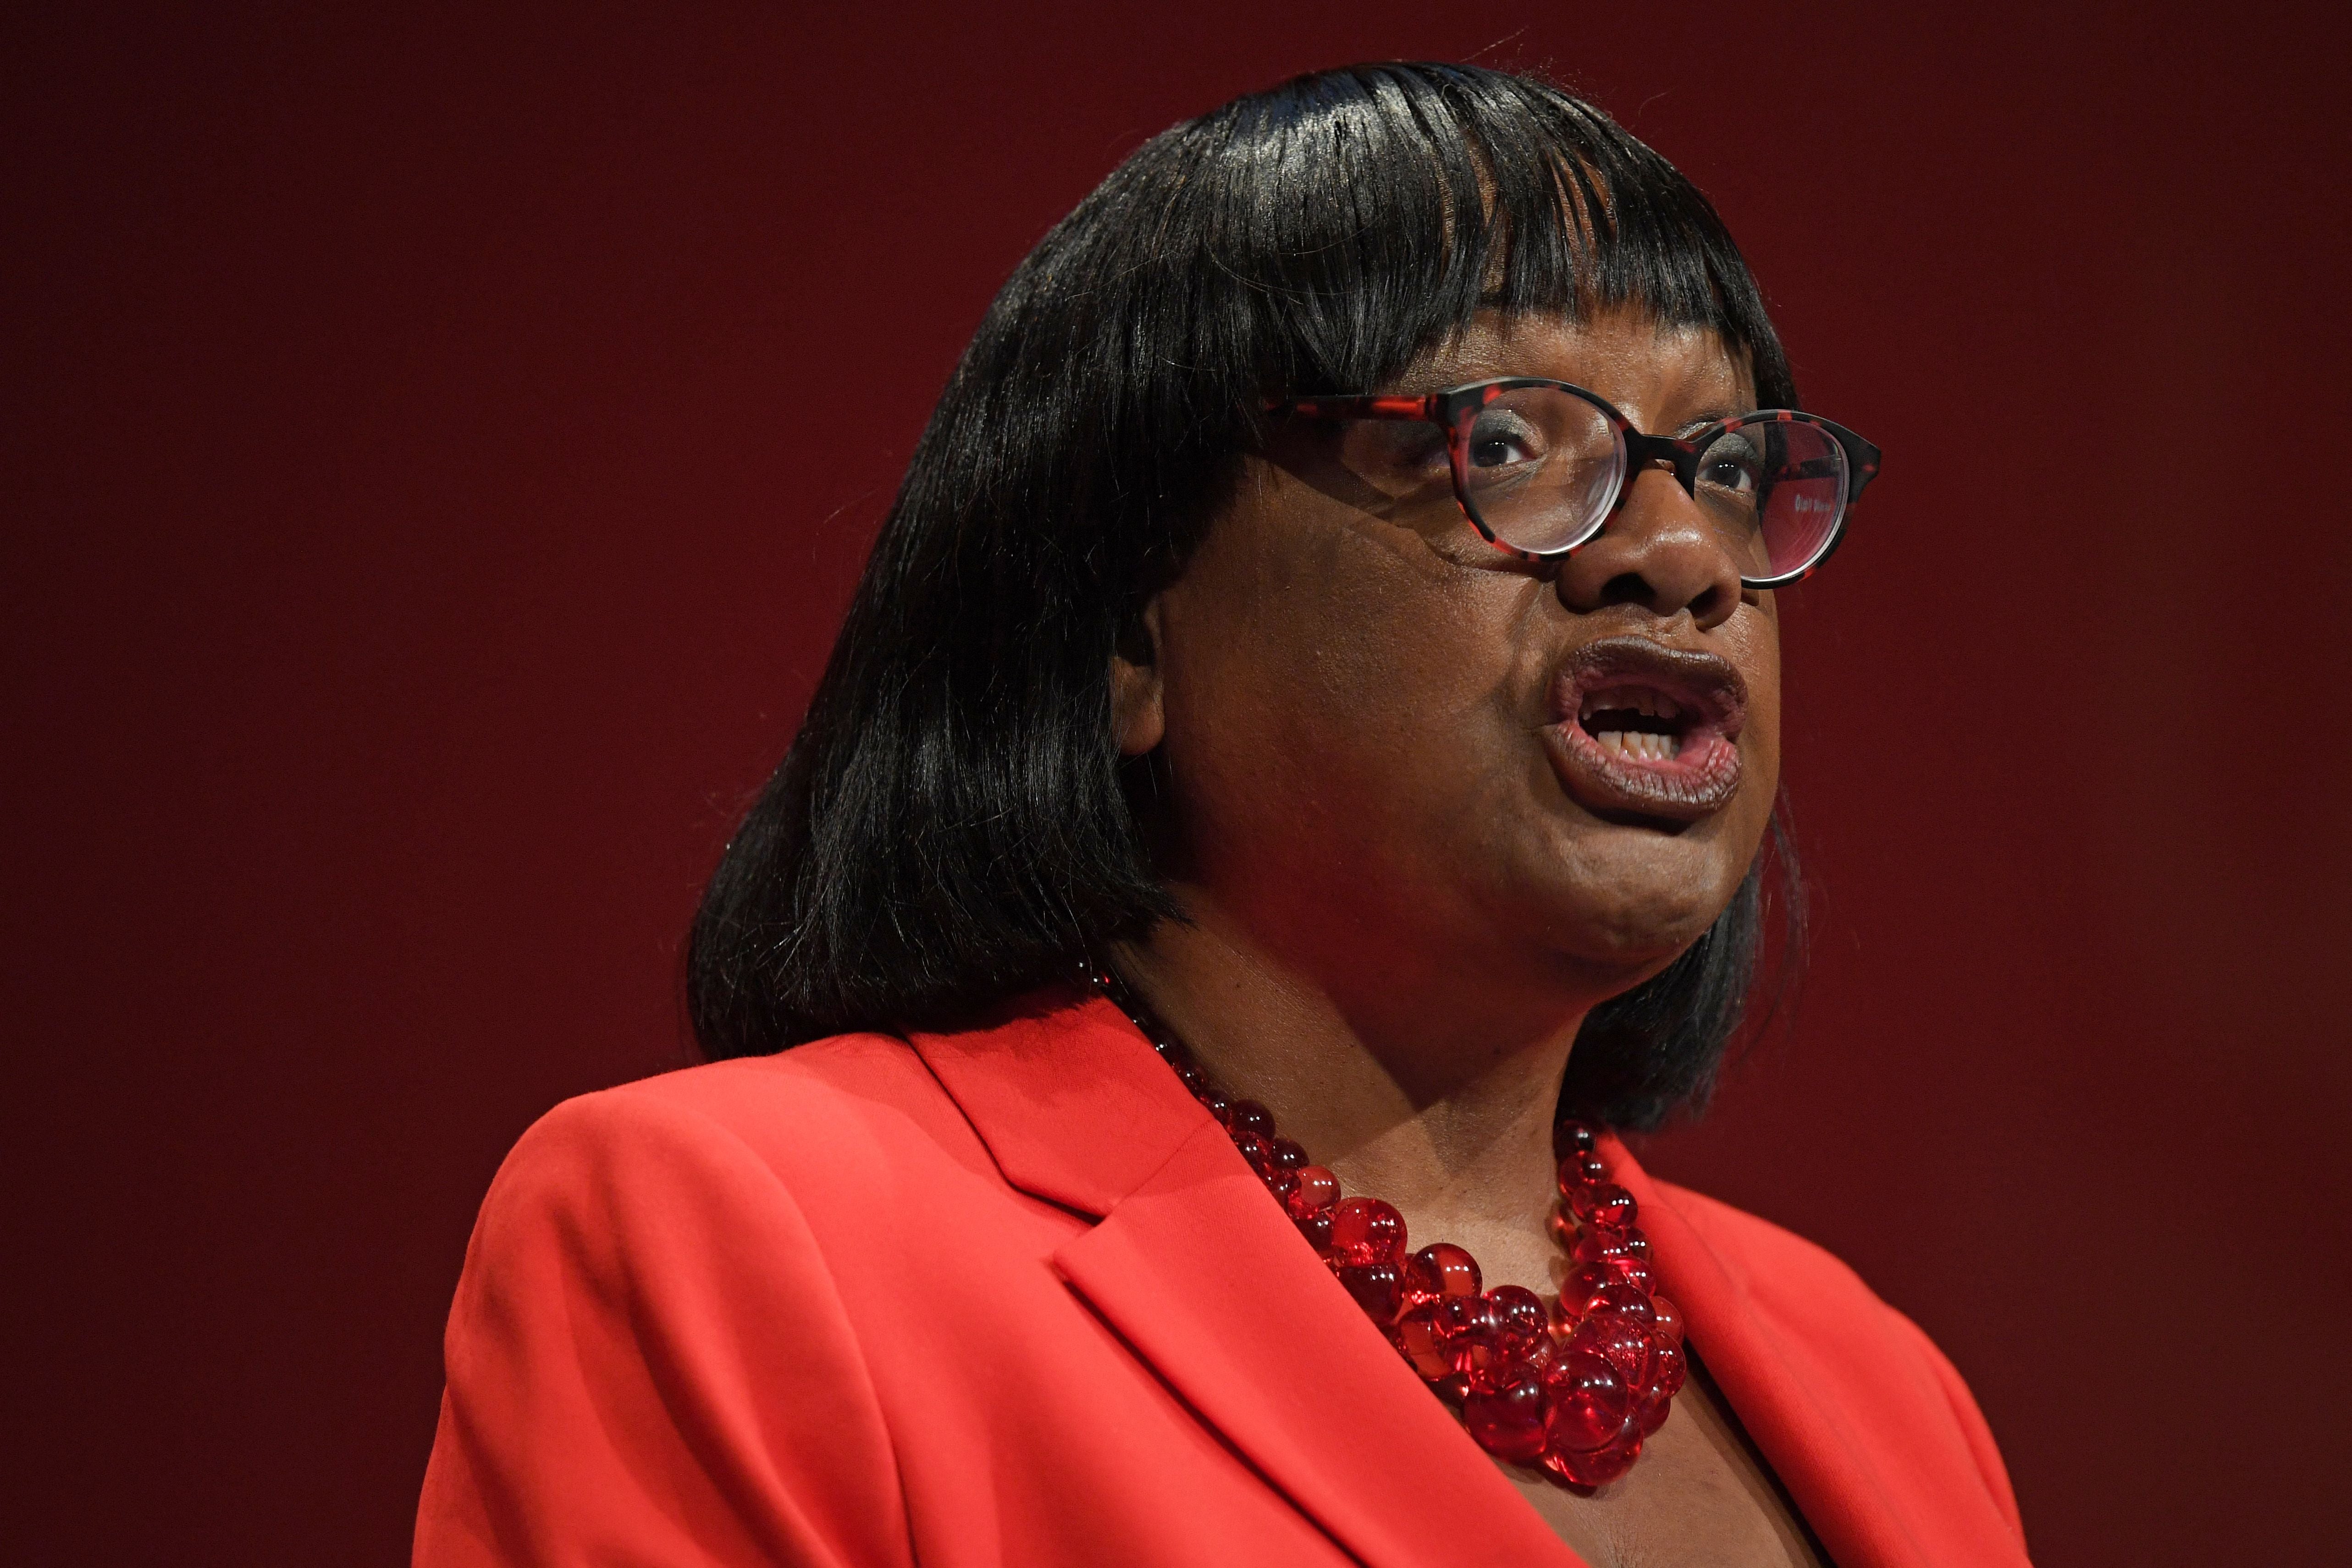 Diane Abbott said the remarks made about her by the chief executive were “frightening”